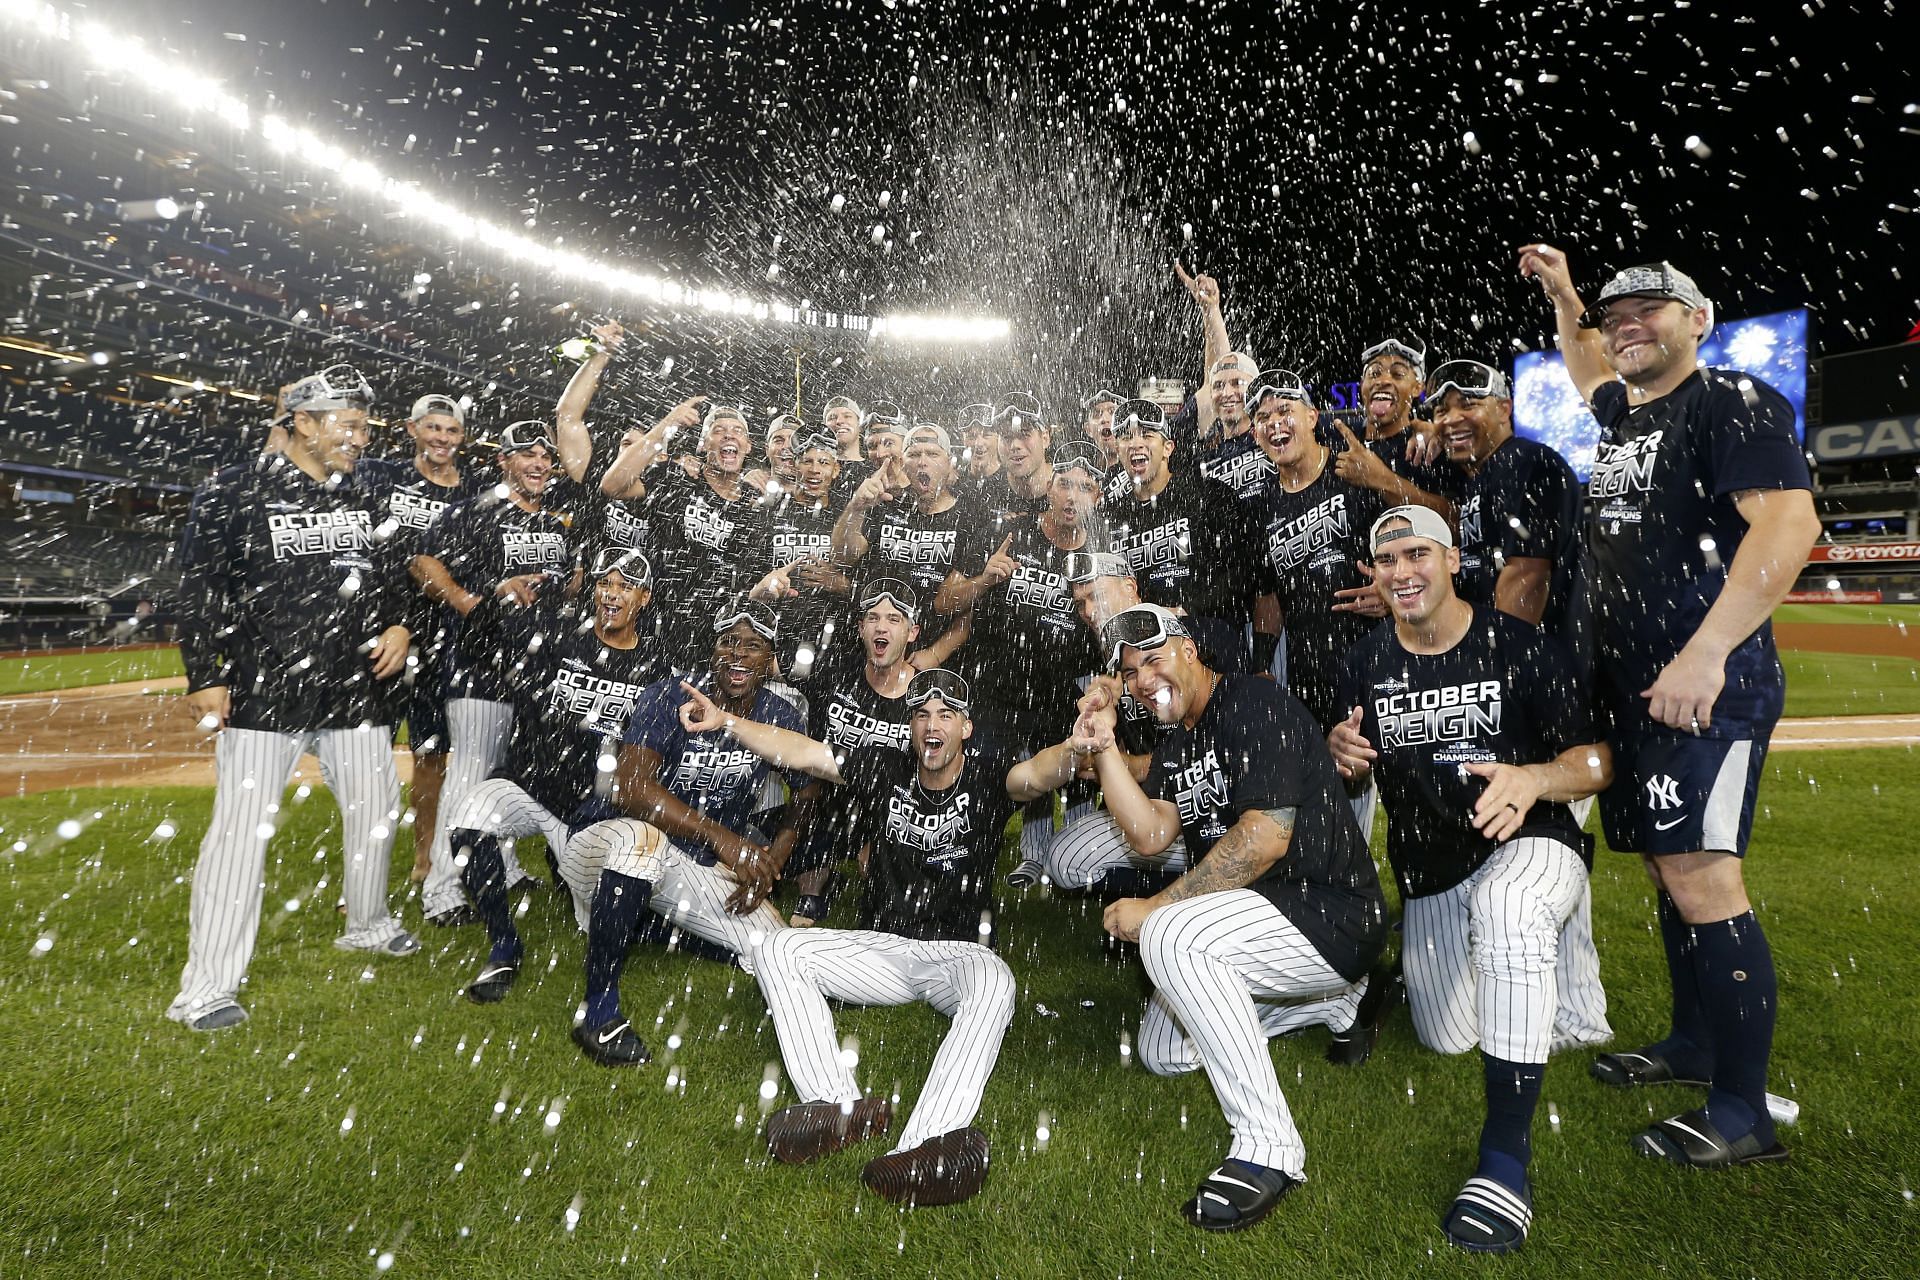 Yankees after winning the AL East in 2019